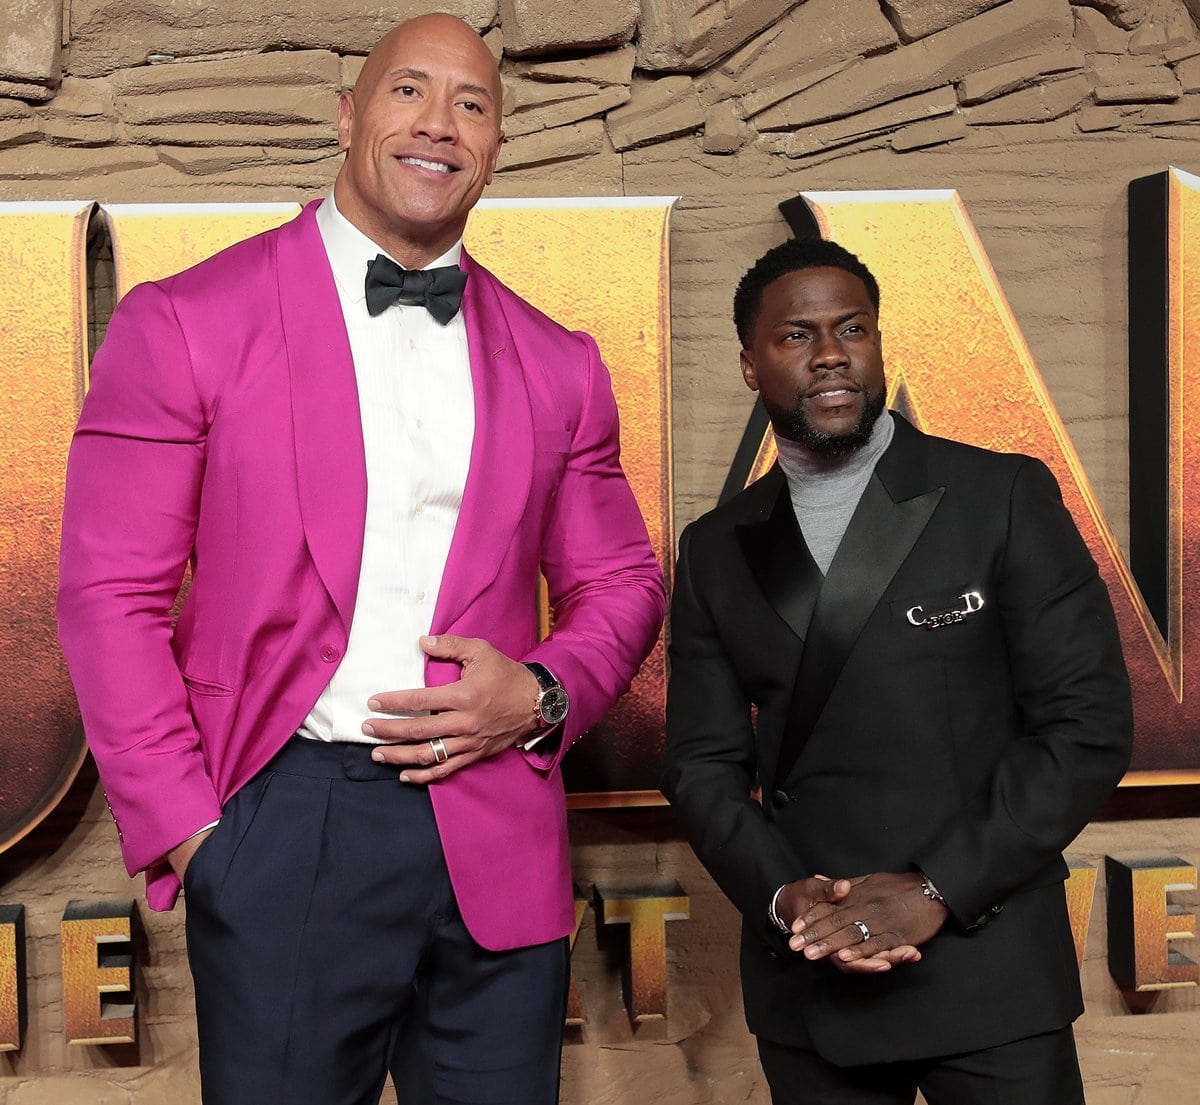 Dwayne Johnson is 6′ 5″ (196 cm) and towers over and Kevin Hart who is 5’2 ½ (158.8 cm)